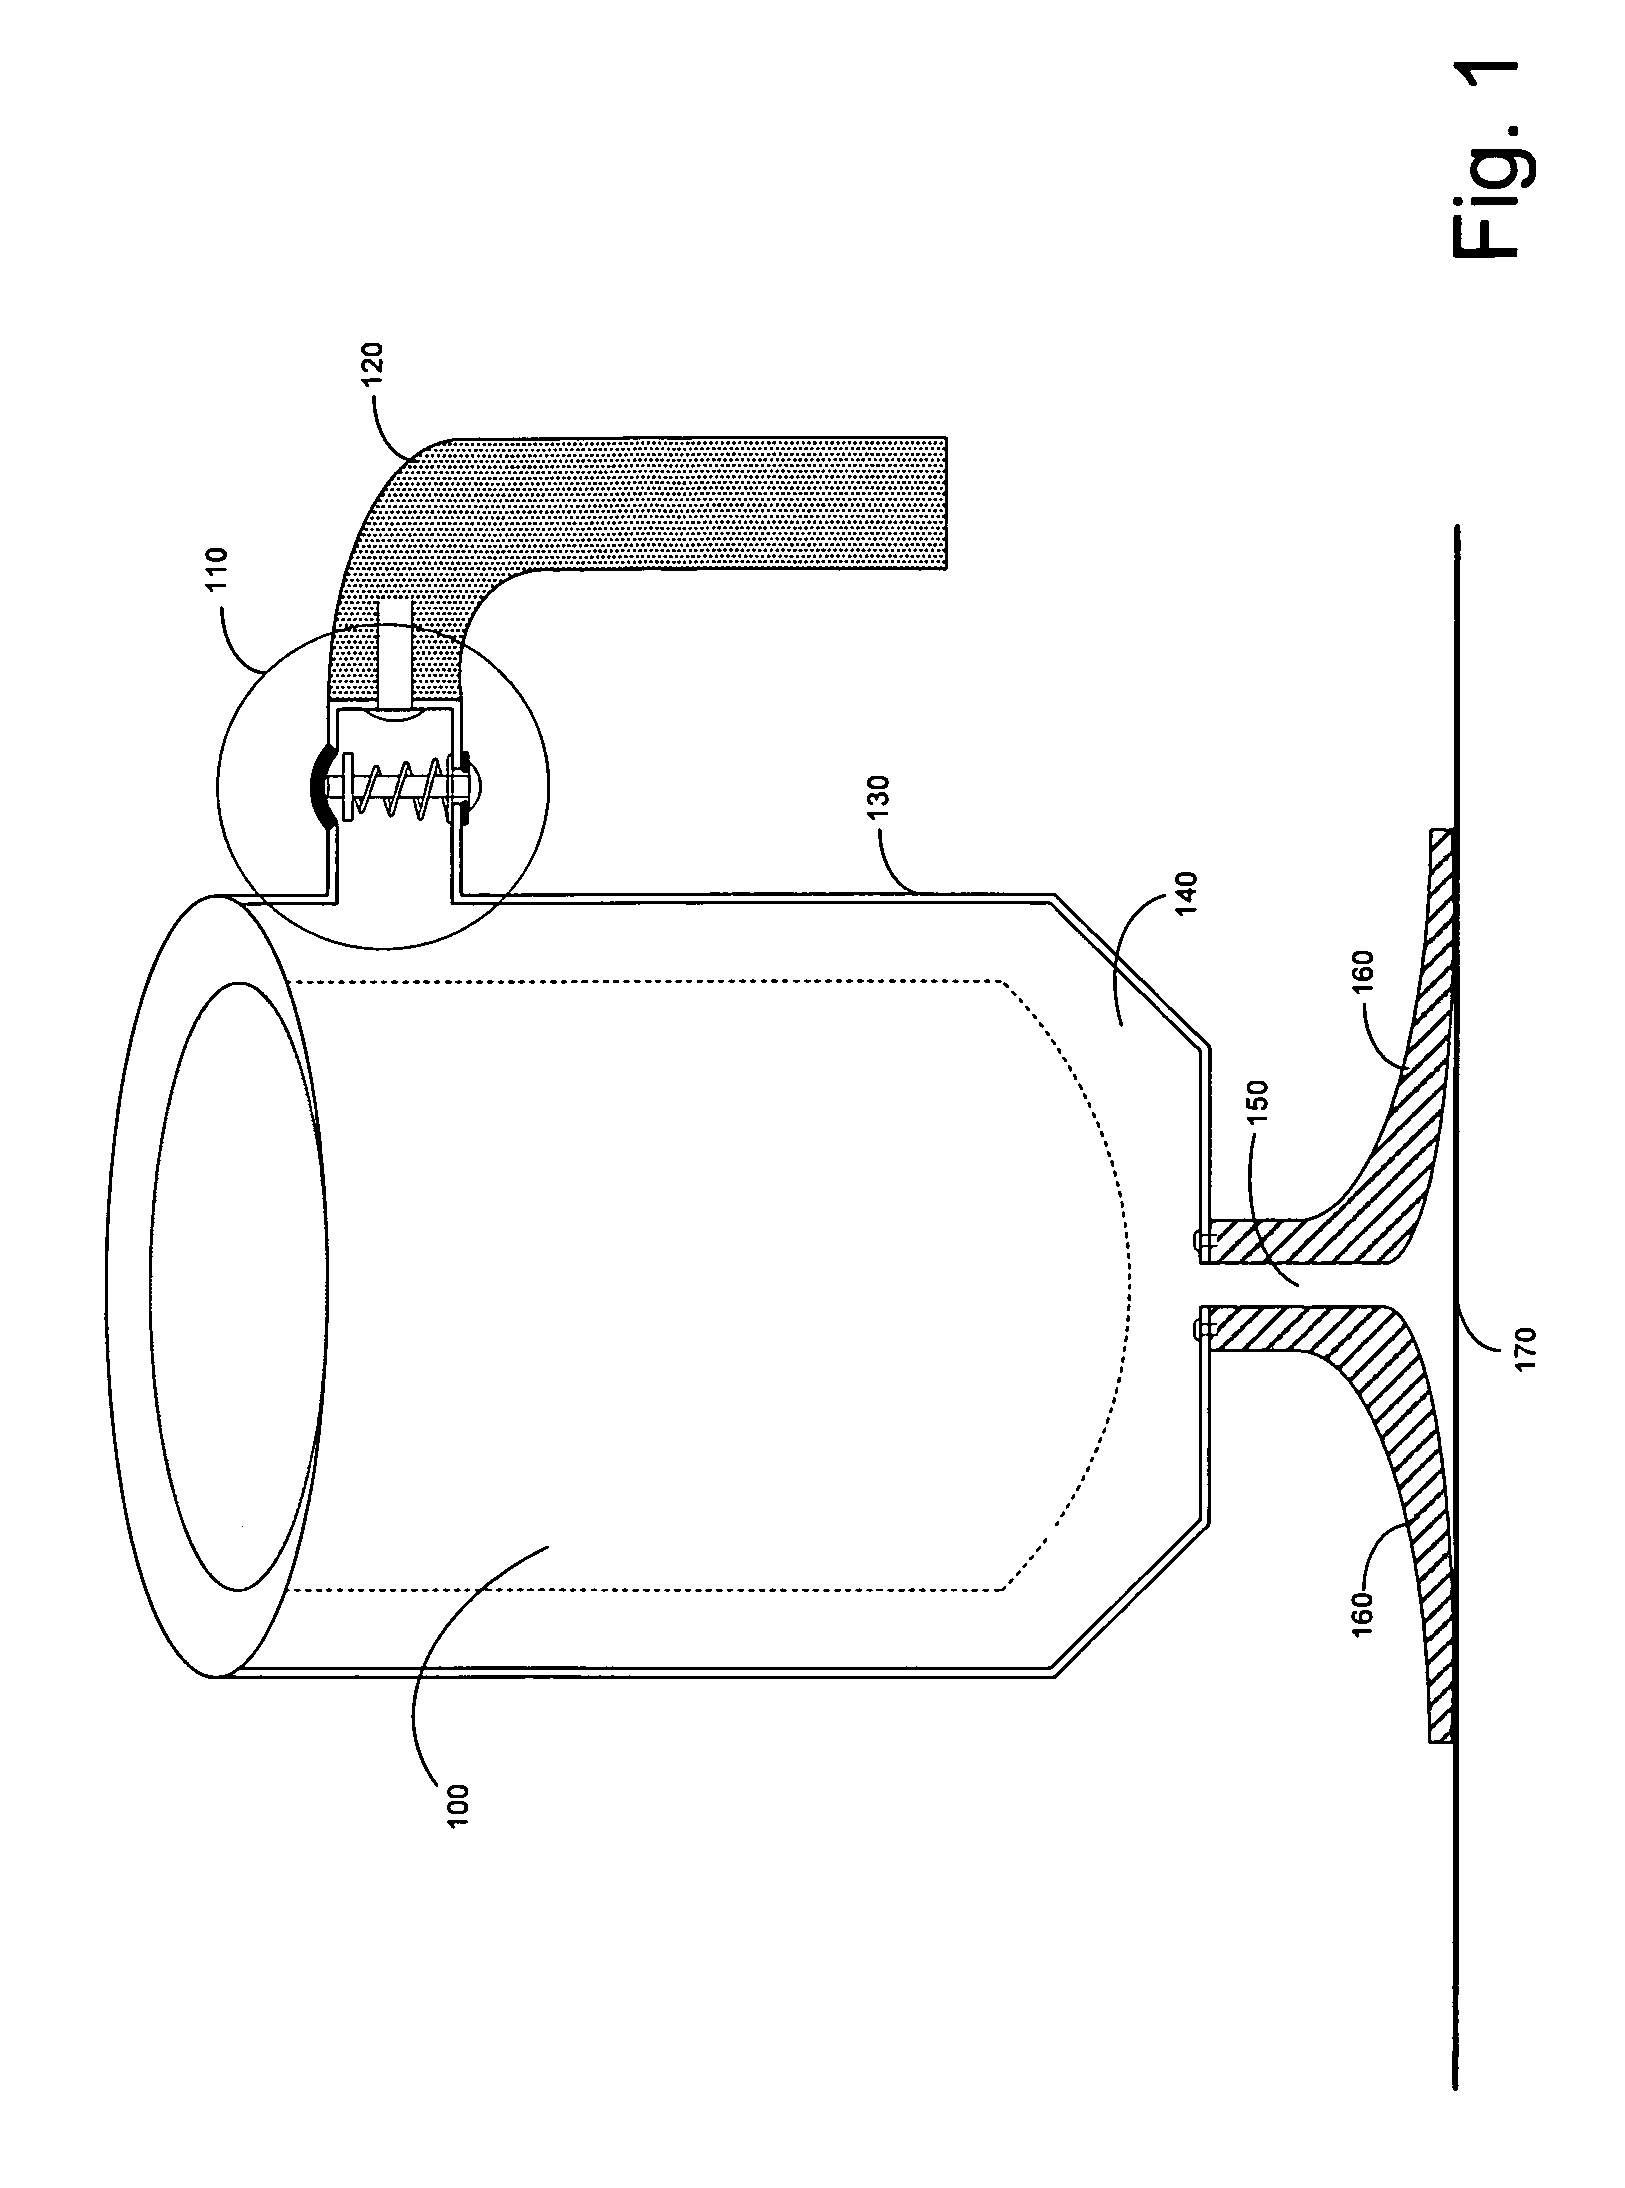 Liquid holding device with releasable suction base